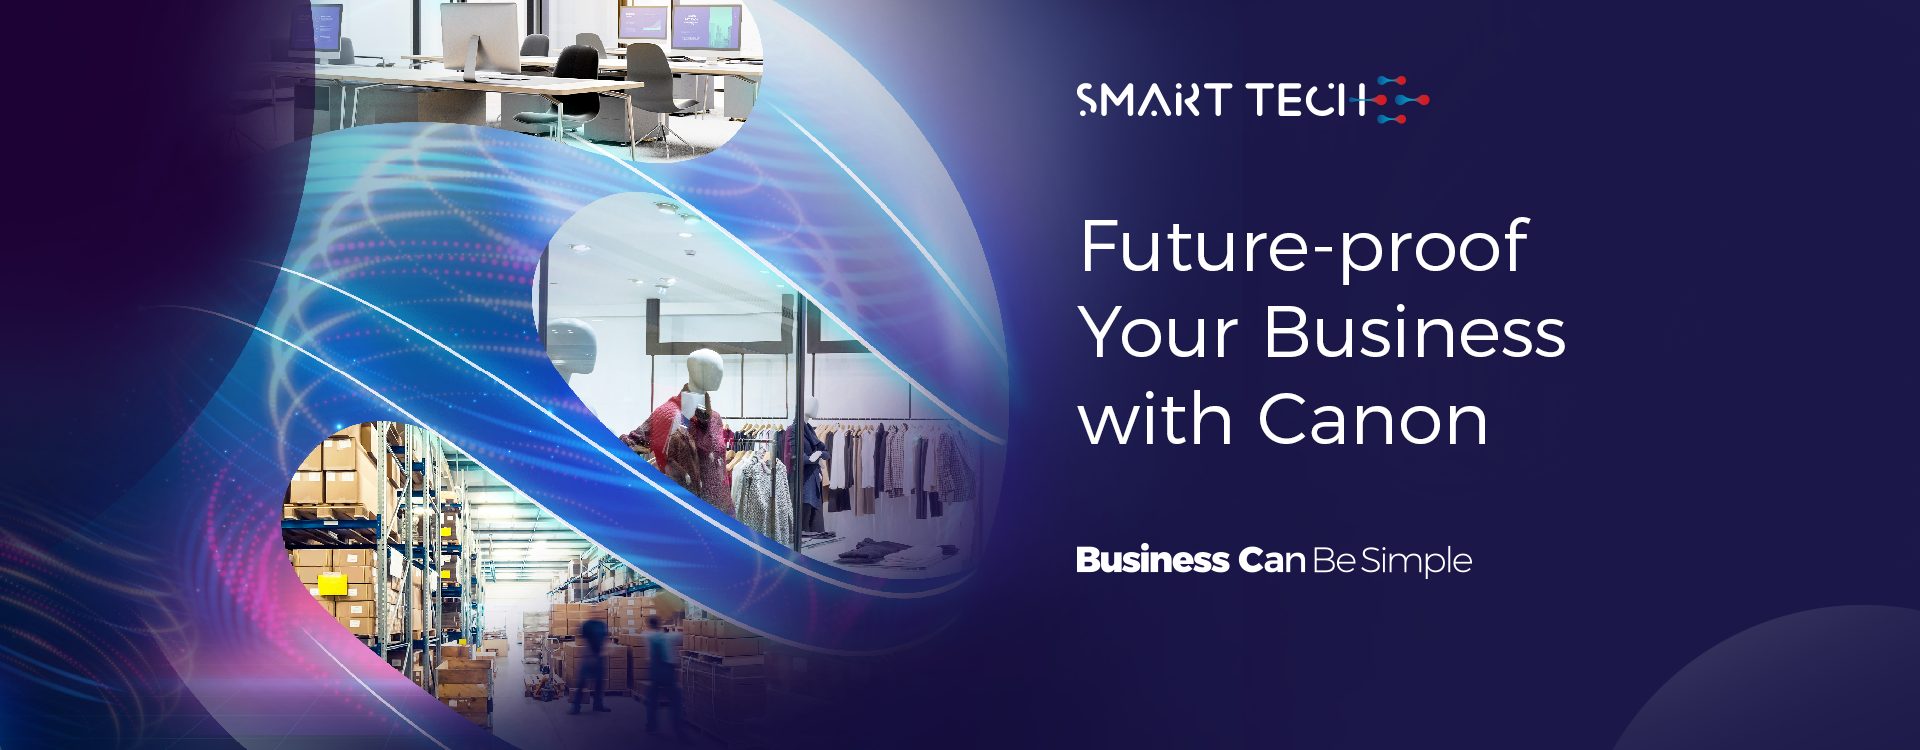 Future-proof Your Business with Canon